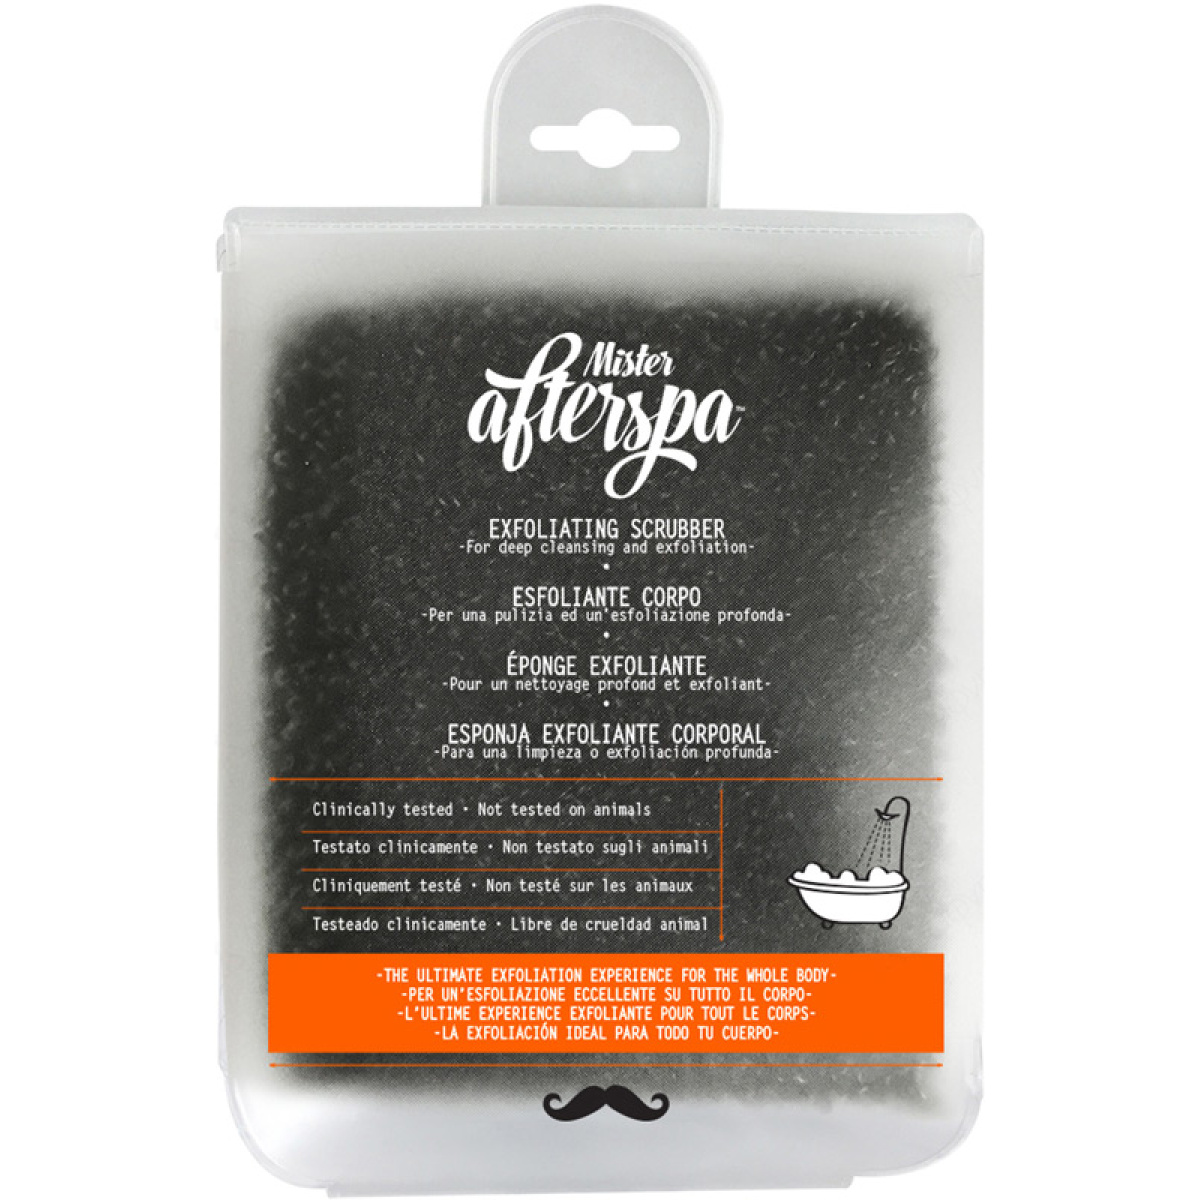 AFTER SPA MISTER EXFOLIATING SCRUBBER